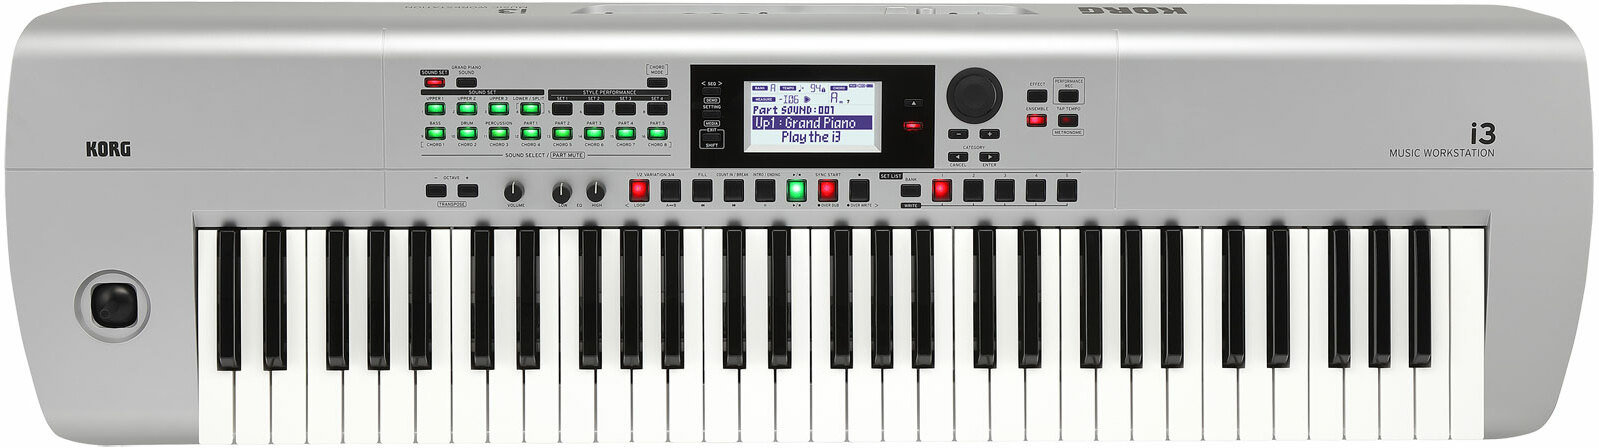 Korg I3 Ms - Synthesizer - Main picture